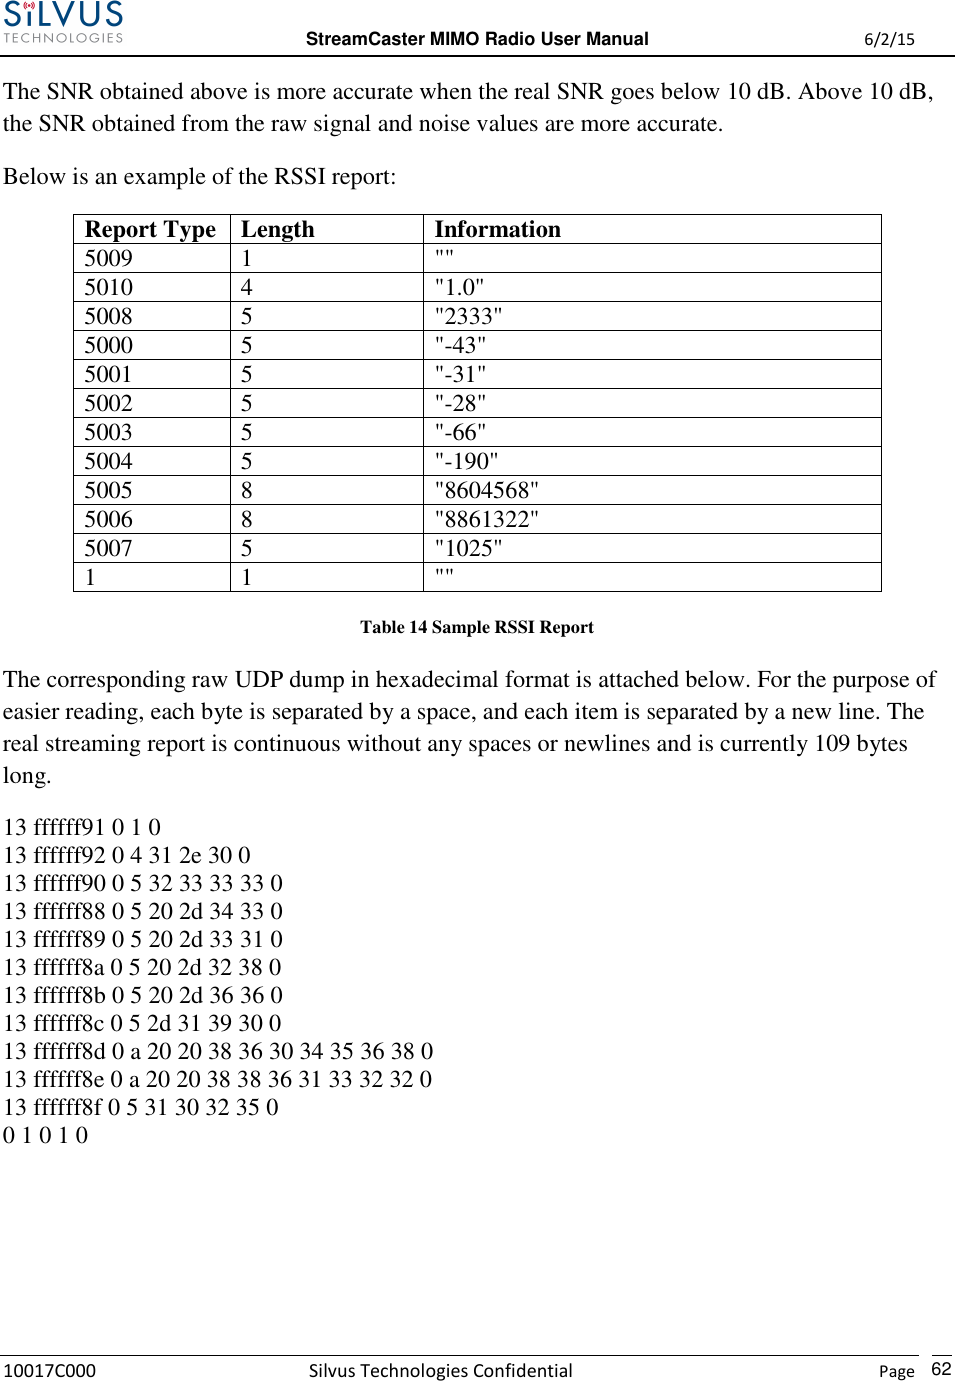  StreamCaster MIMO Radio User Manual  6/2/15 10017C000 Silvus Technologies Confidential    Page   62 The SNR obtained above is more accurate when the real SNR goes below 10 dB. Above 10 dB, the SNR obtained from the raw signal and noise values are more accurate. Below is an example of the RSSI report: Report Type  Length  Information 5009  1  &quot;&quot; 5010  4  &quot;1.0&quot; 5008  5  &quot;2333&quot; 5000  5  &quot;-43&quot; 5001  5  &quot;-31&quot; 5002  5  &quot;-28&quot; 5003  5  &quot;-66&quot; 5004  5  &quot;-190&quot; 5005  8  &quot;8604568&quot; 5006  8  &quot;8861322&quot; 5007  5  &quot;1025&quot; 1  1  &quot;&quot; Table 14 Sample RSSI Report The corresponding raw UDP dump in hexadecimal format is attached below. For the purpose of easier reading, each byte is separated by a space, and each item is separated by a new line. The real streaming report is continuous without any spaces or newlines and is currently 109 bytes long. 13 ffffff91 0 1 0  13 ffffff92 0 4 31 2e 30 0  13 ffffff90 0 5 32 33 33 33 0  13 ffffff88 0 5 20 2d 34 33 0  13 ffffff89 0 5 20 2d 33 31 0  13 ffffff8a 0 5 20 2d 32 38 0  13 ffffff8b 0 5 20 2d 36 36 0  13 ffffff8c 0 5 2d 31 39 30 0  13 ffffff8d 0 a 20 20 38 36 30 34 35 36 38 0  13 ffffff8e 0 a 20 20 38 38 36 31 33 32 32 0  13 ffffff8f 0 5 31 30 32 35 0  0 1 0 1 0    